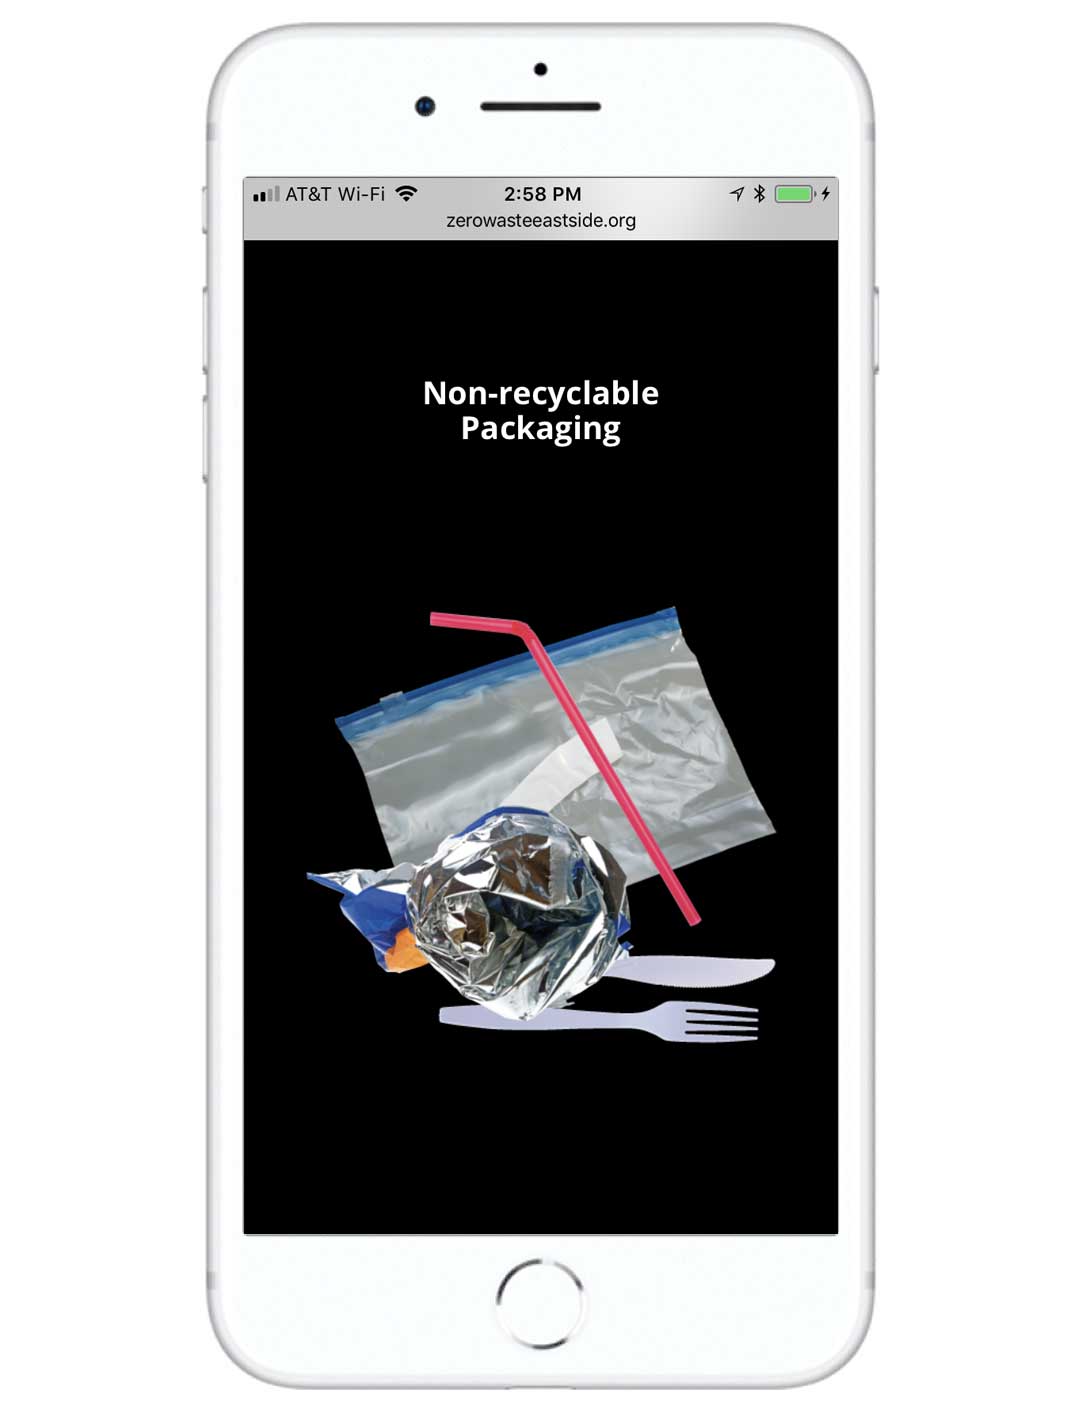 Screenshot of the Zero Waste East Side website on a mobile device